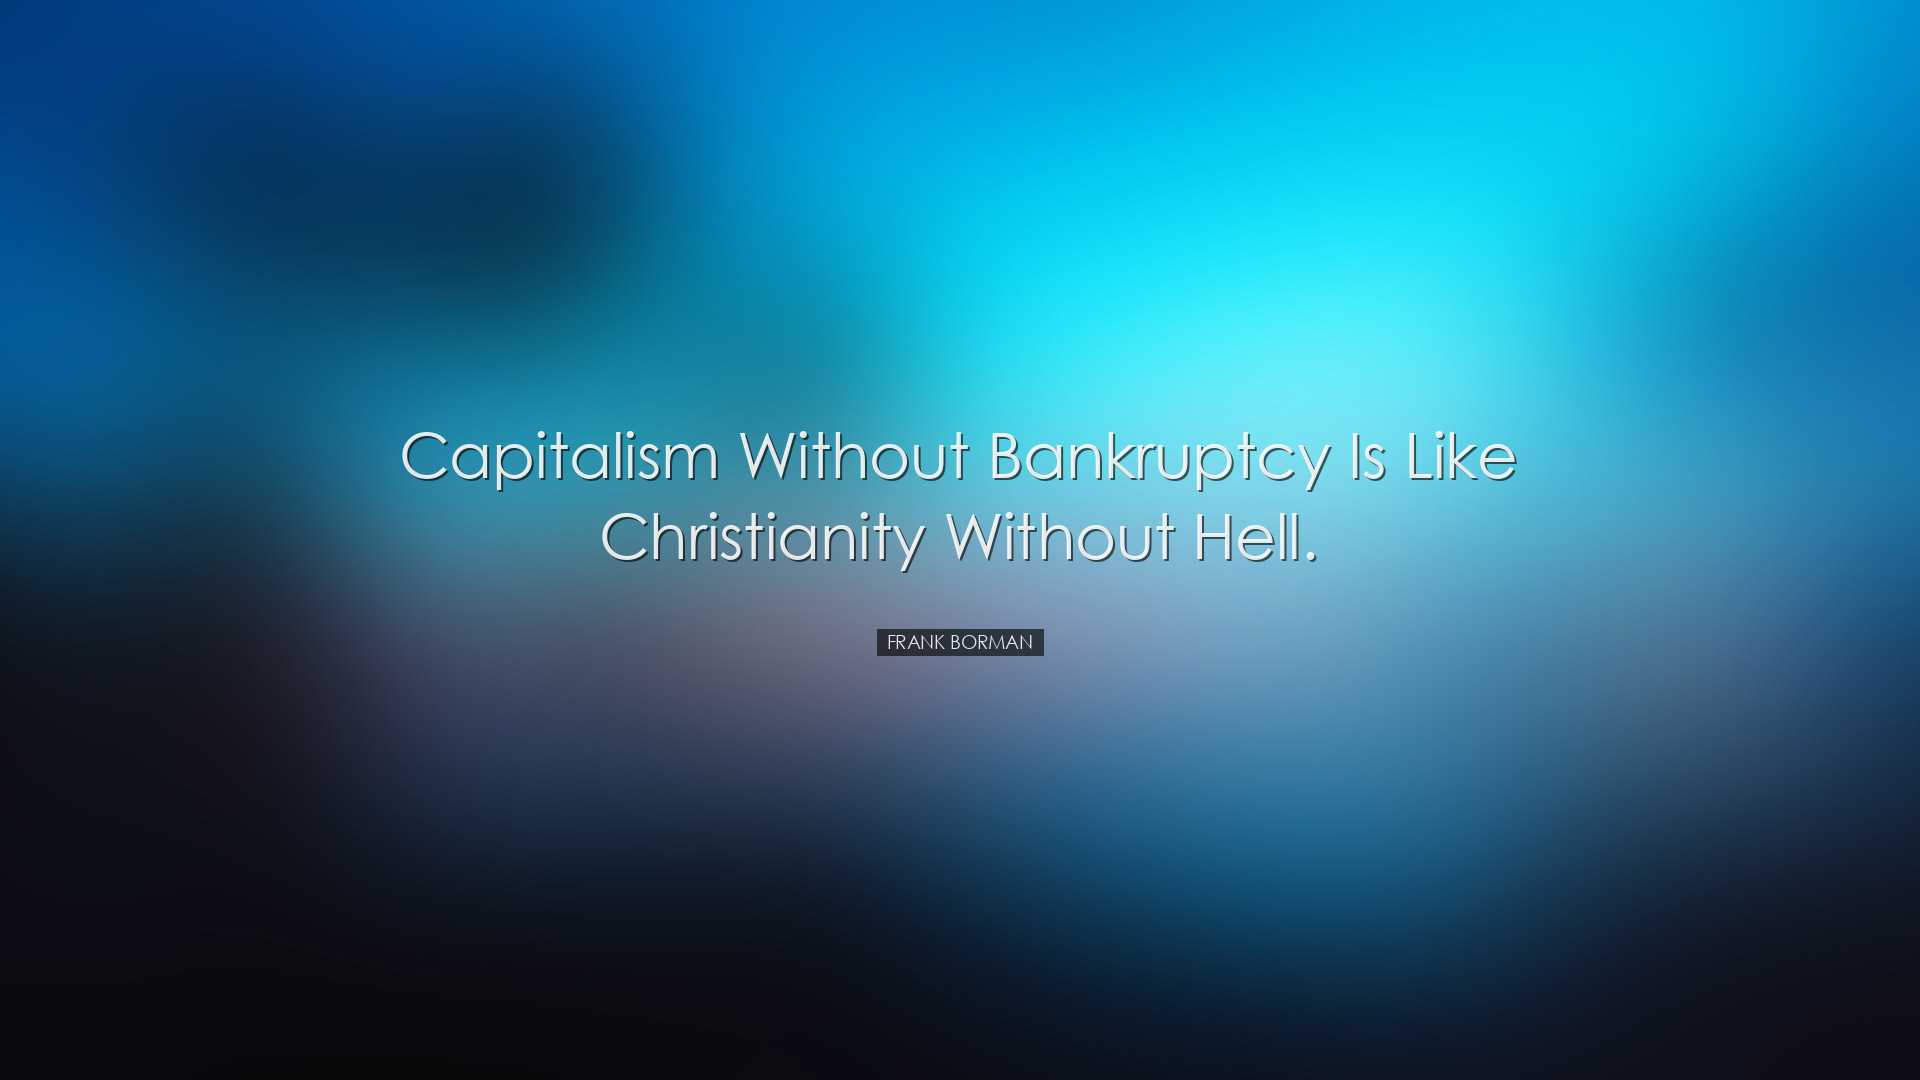 Capitalism without bankruptcy is like Christianity without hell. -